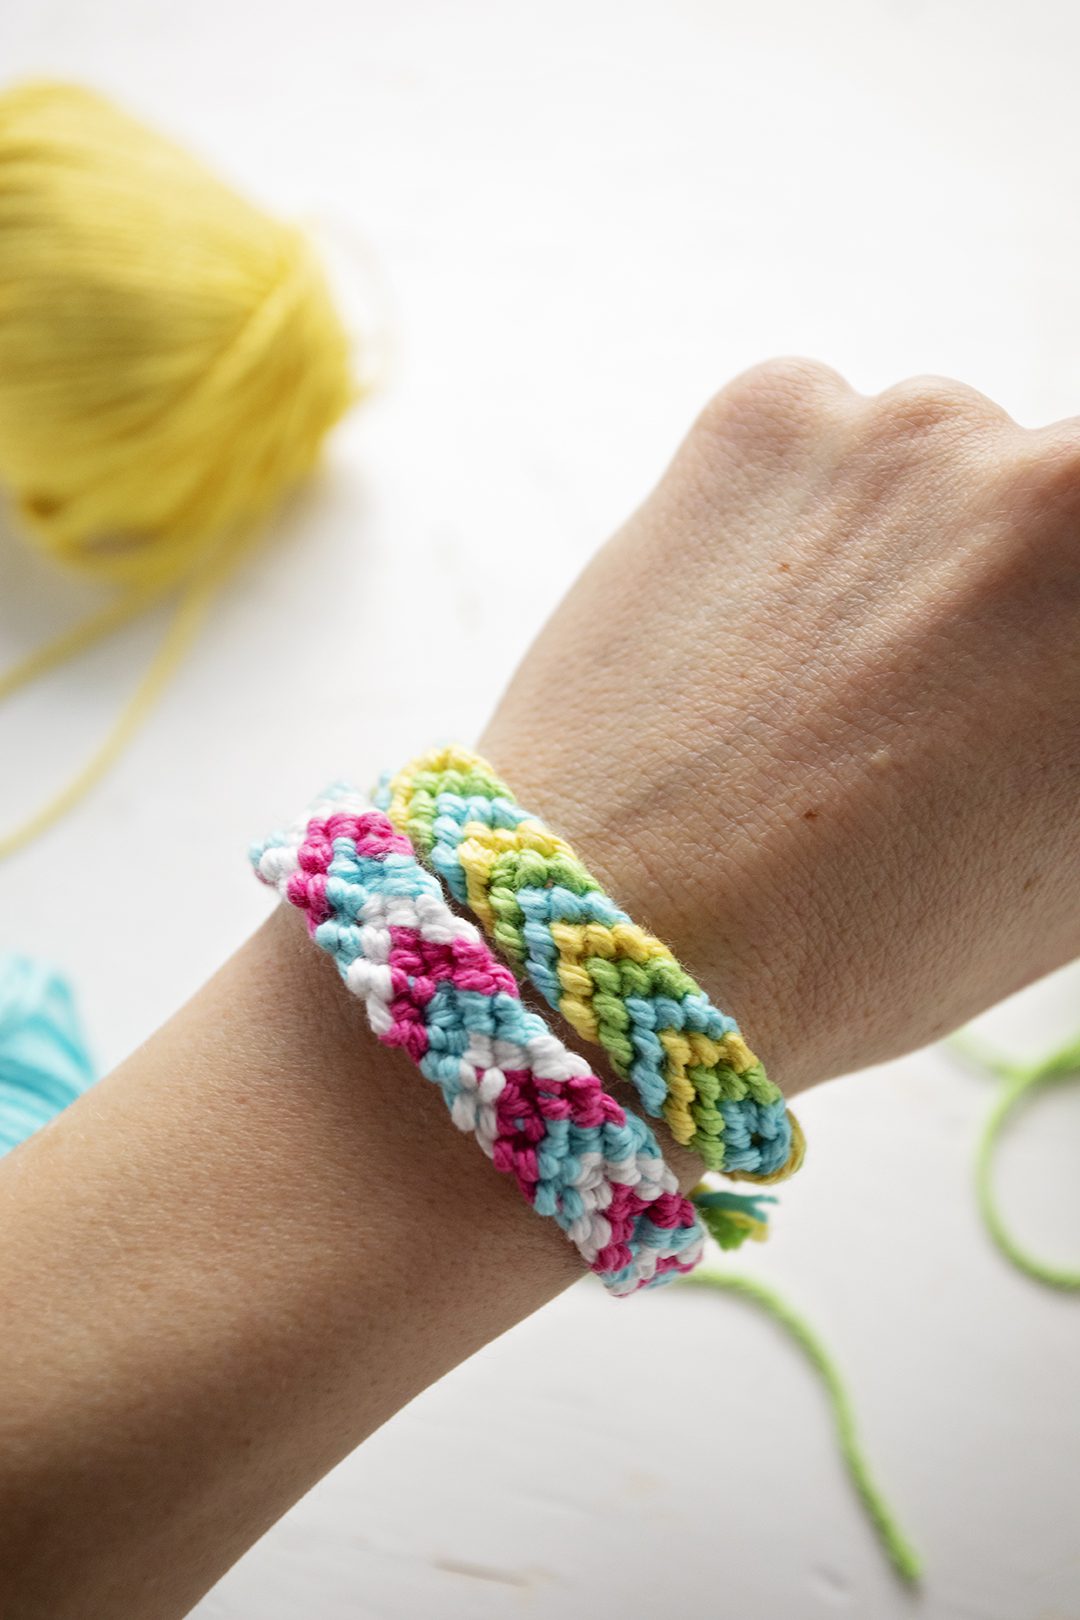 Two chevron pattern bracelets in green, blue, yellow, pink, and white embroidery floss, tied on a person's wrist.